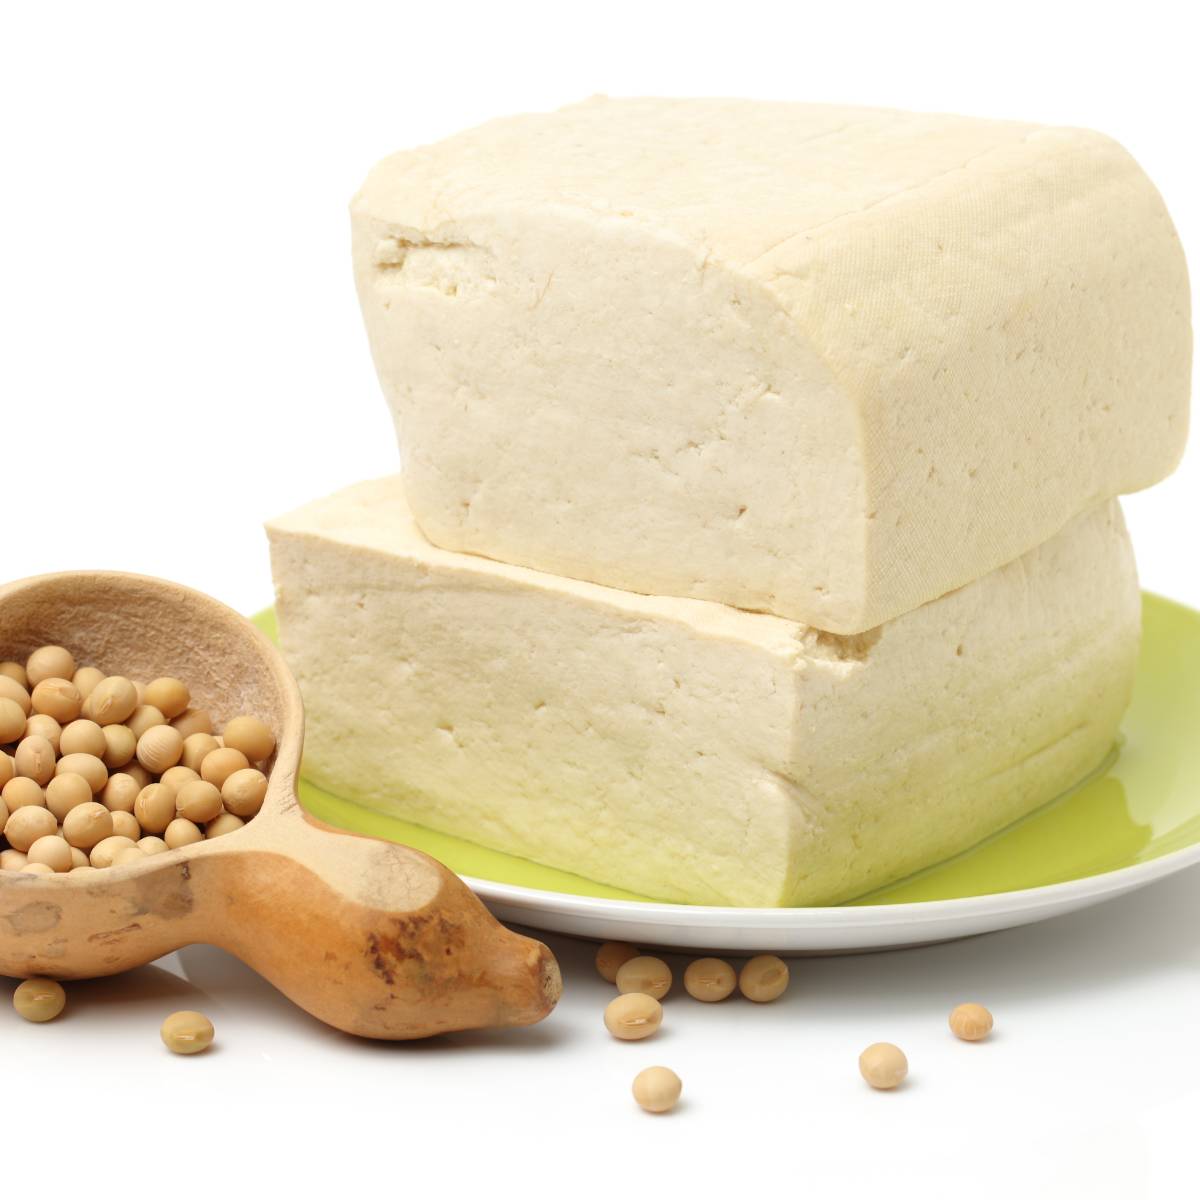 White firm textured tofu made from soybean